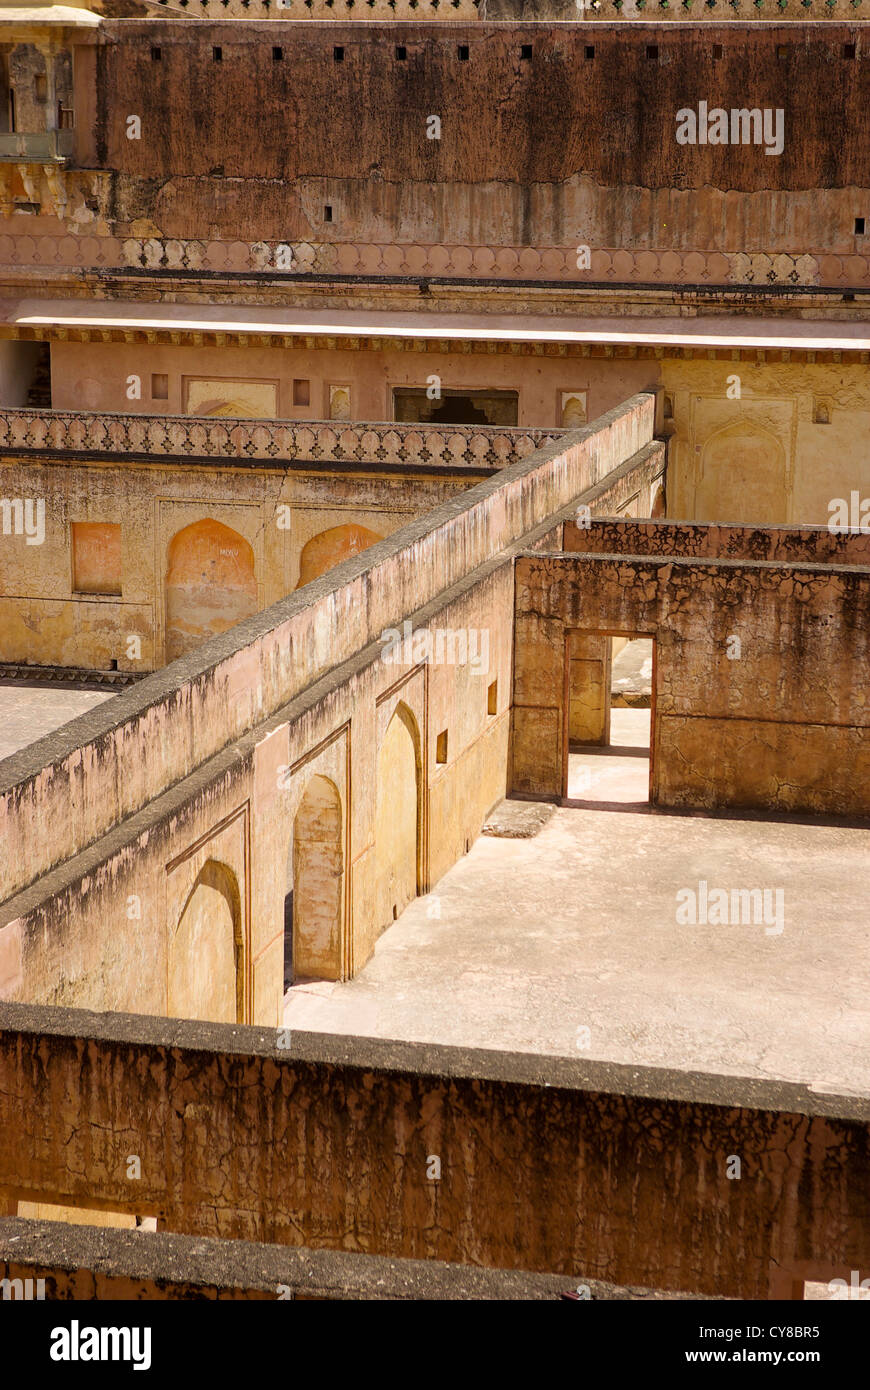 Dividing walls in the courtyard at the Palace of Man Singh I in Amer / Amber Fort near Jaipur, Rajasthan, India Stock Photo